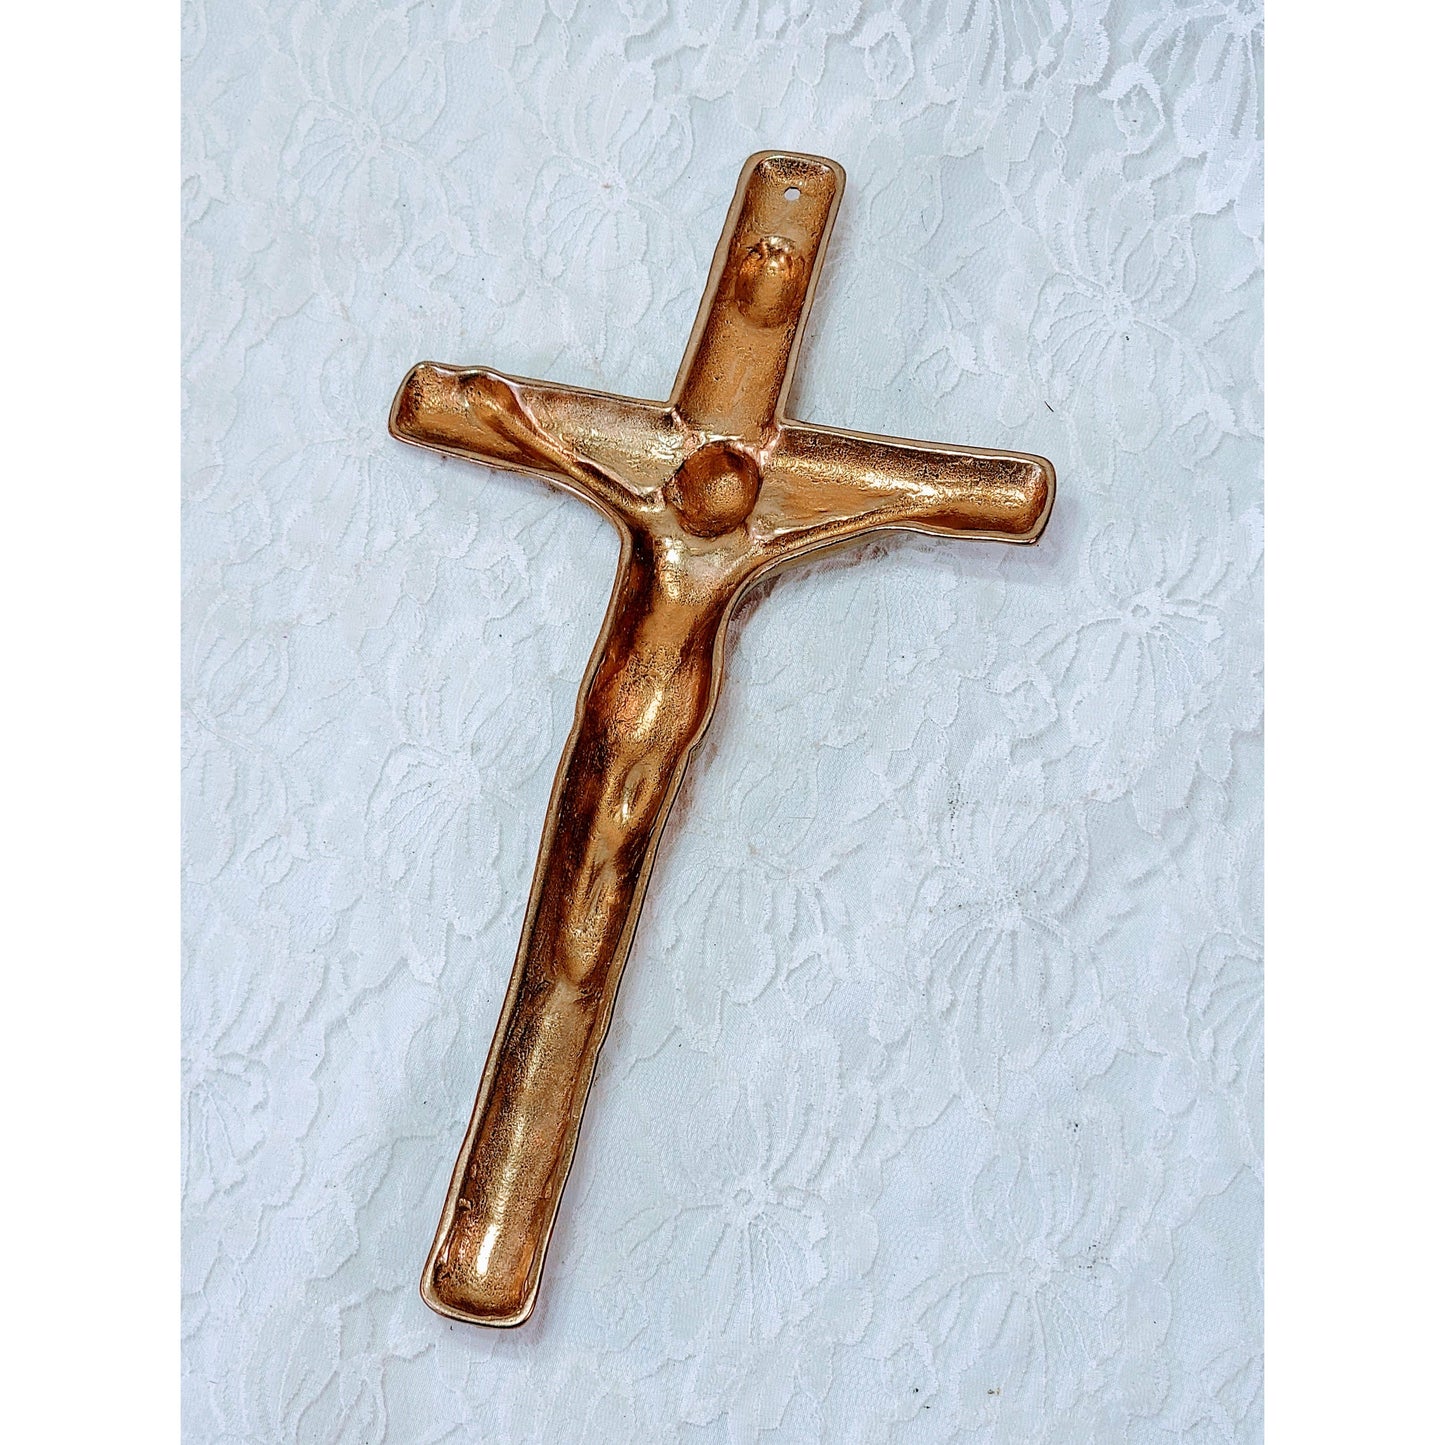 Vintage Brass Wall Crucifix Cross ~ 10" Wall Cross ~ Brass Pour Mold ~ Unique Religious Gift for Grandma